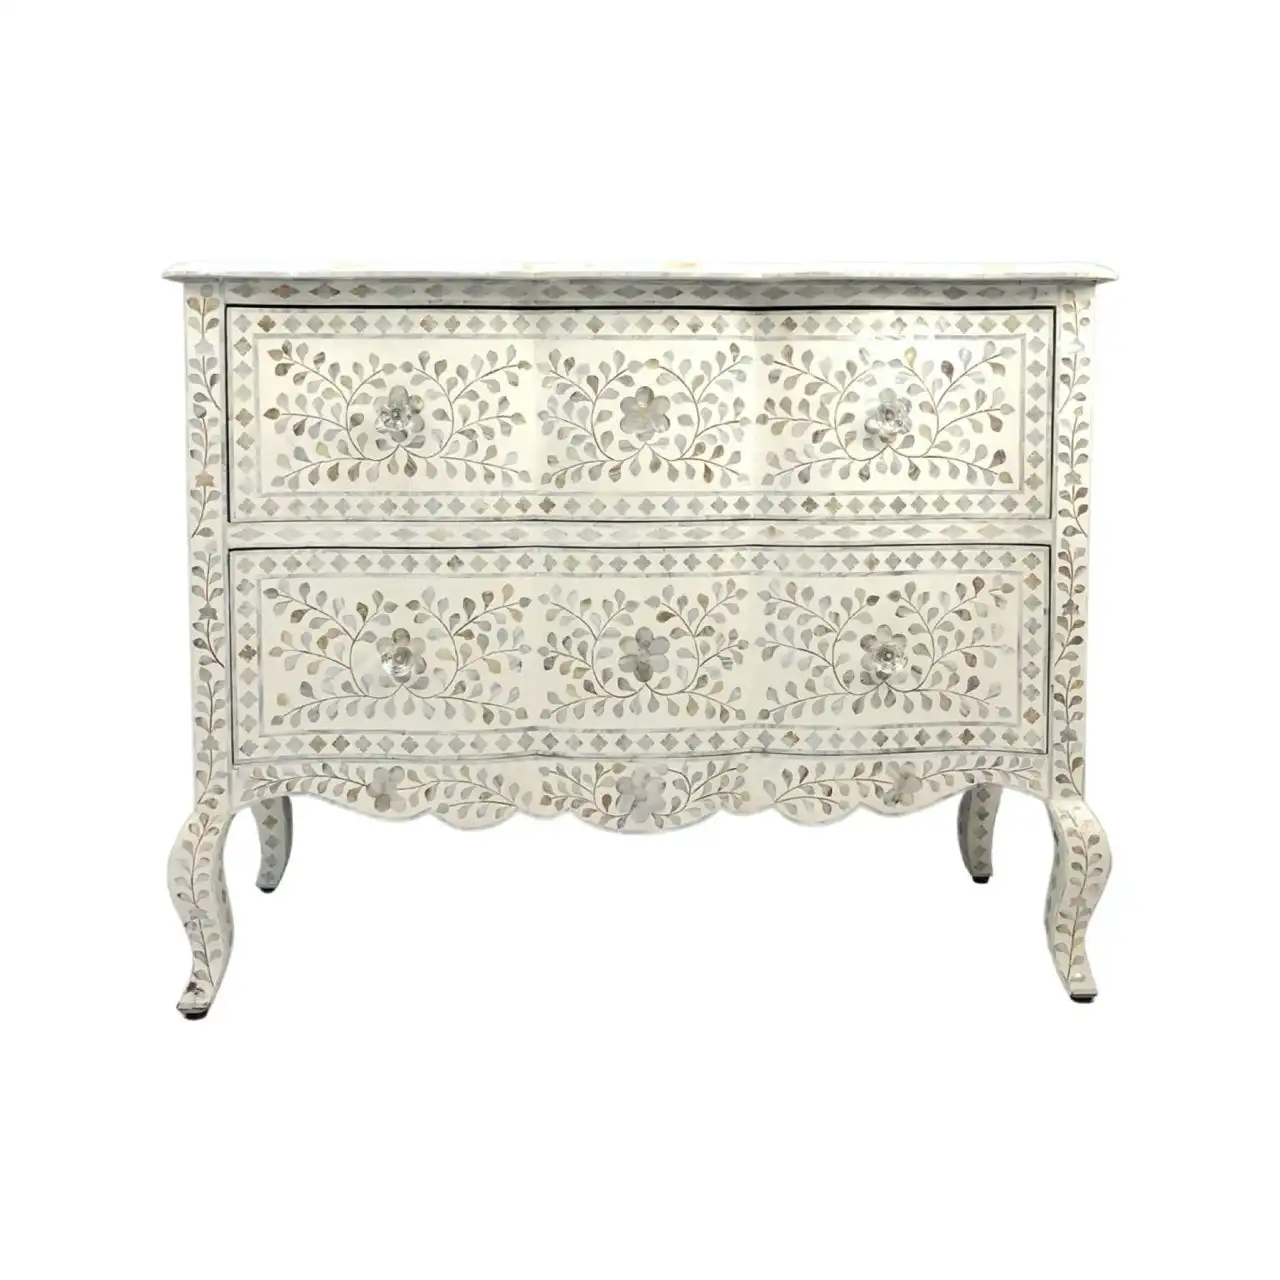 Zohi Interiors Mother of Pearl Inlay Provincial 2 Drawer Dresser in White